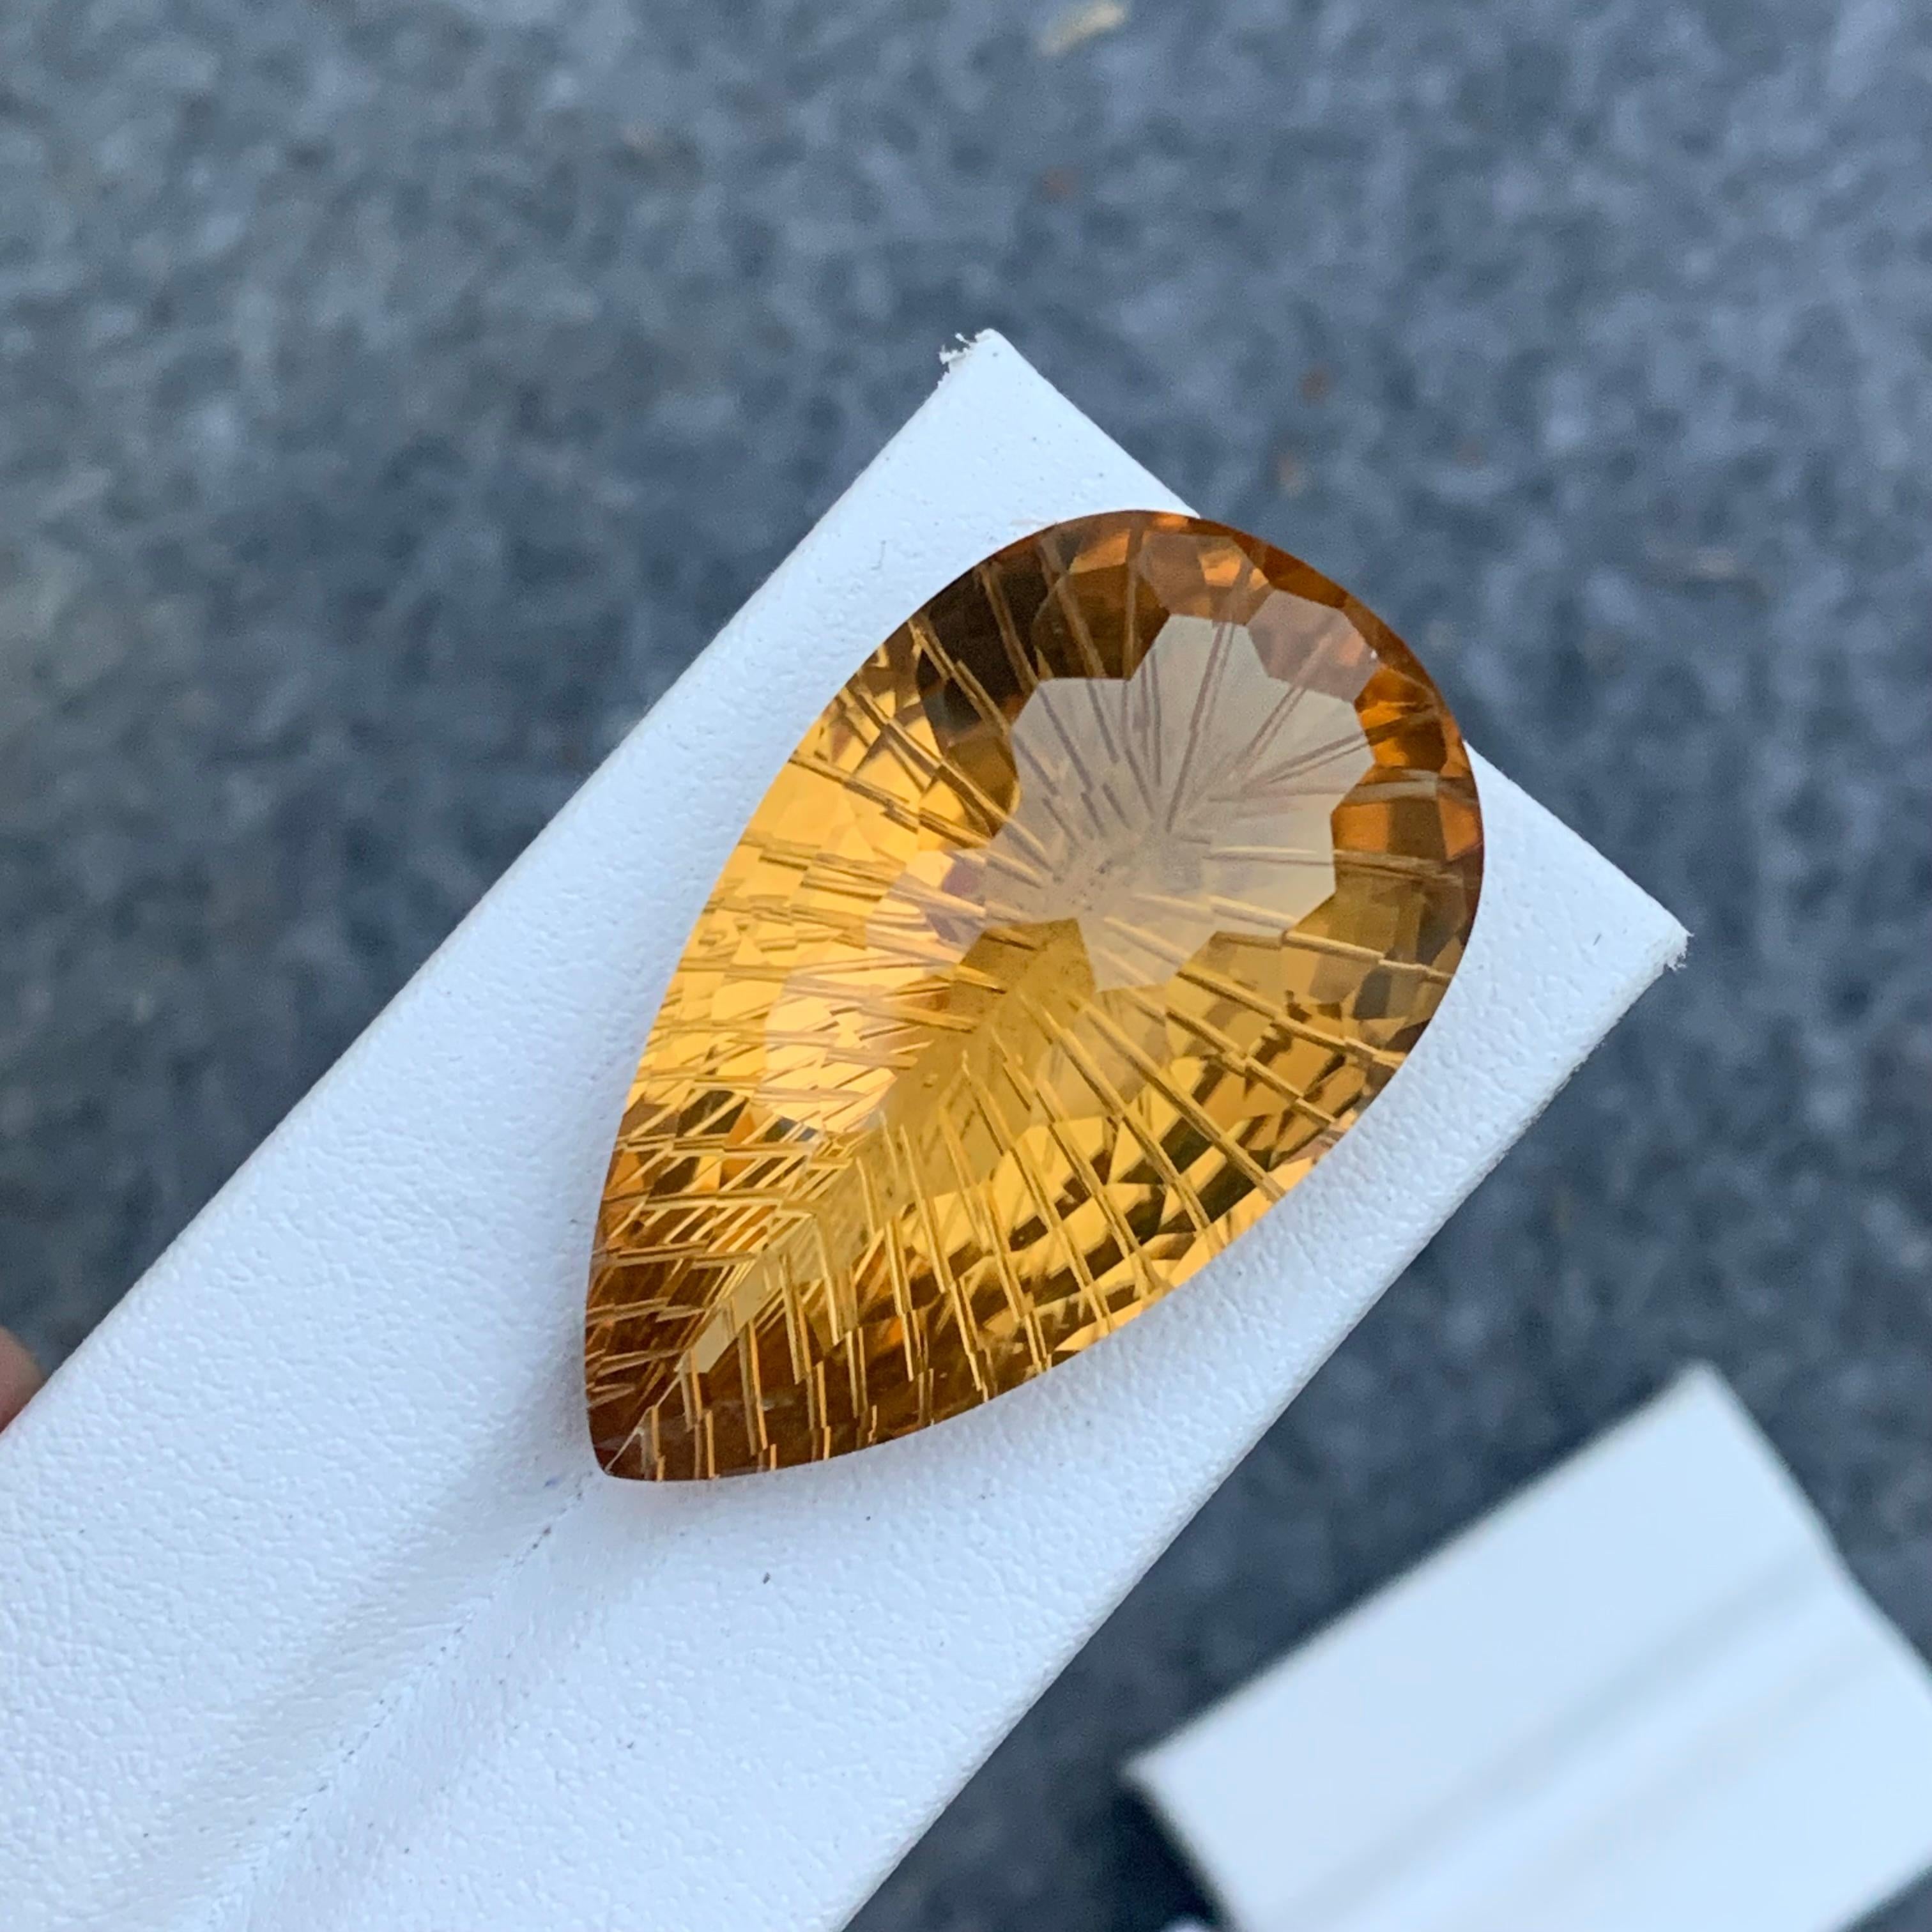 Faceted Honey Citrine
Weight : 61.60 Carats
Dimensions : 40x22x14.7 Mm
Clarity : Eye Clean 
Origin : Brazil
Color: Yellow
Shape: Pear / Tear
Certificate: On Demand
Month: November
.
The Many Healing Properties of Citrine
Increase Optimism, And Sunny